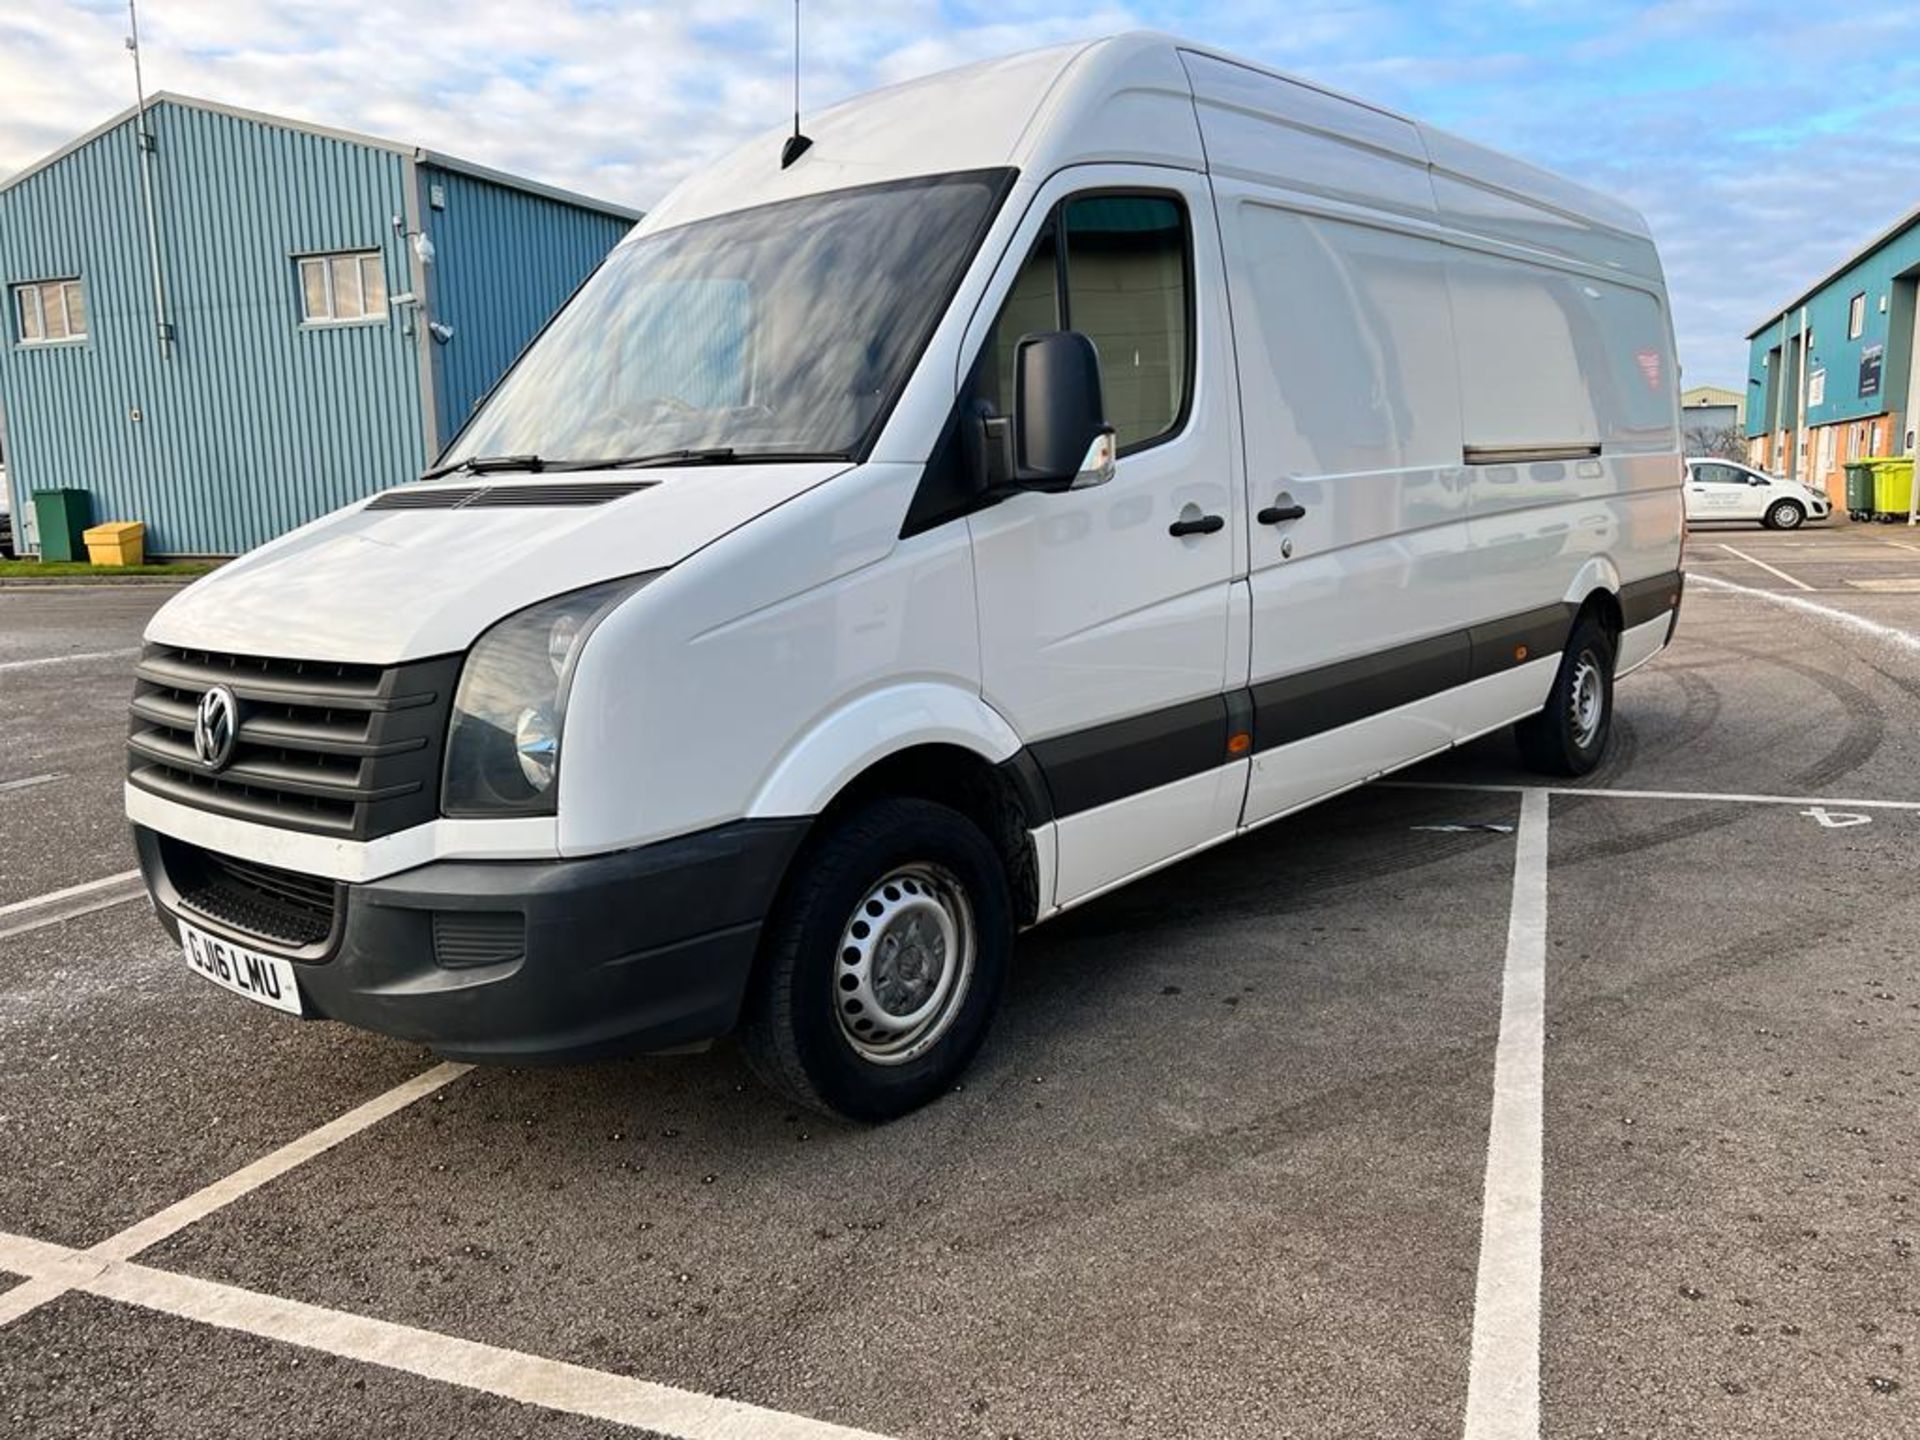 (RESERVE MET) Volkswagen Crafter CR35 2.0tdi 134bhp 'LWB HIGH ROOF' - 2016 16 Reg - fully ply lined - Image 3 of 19